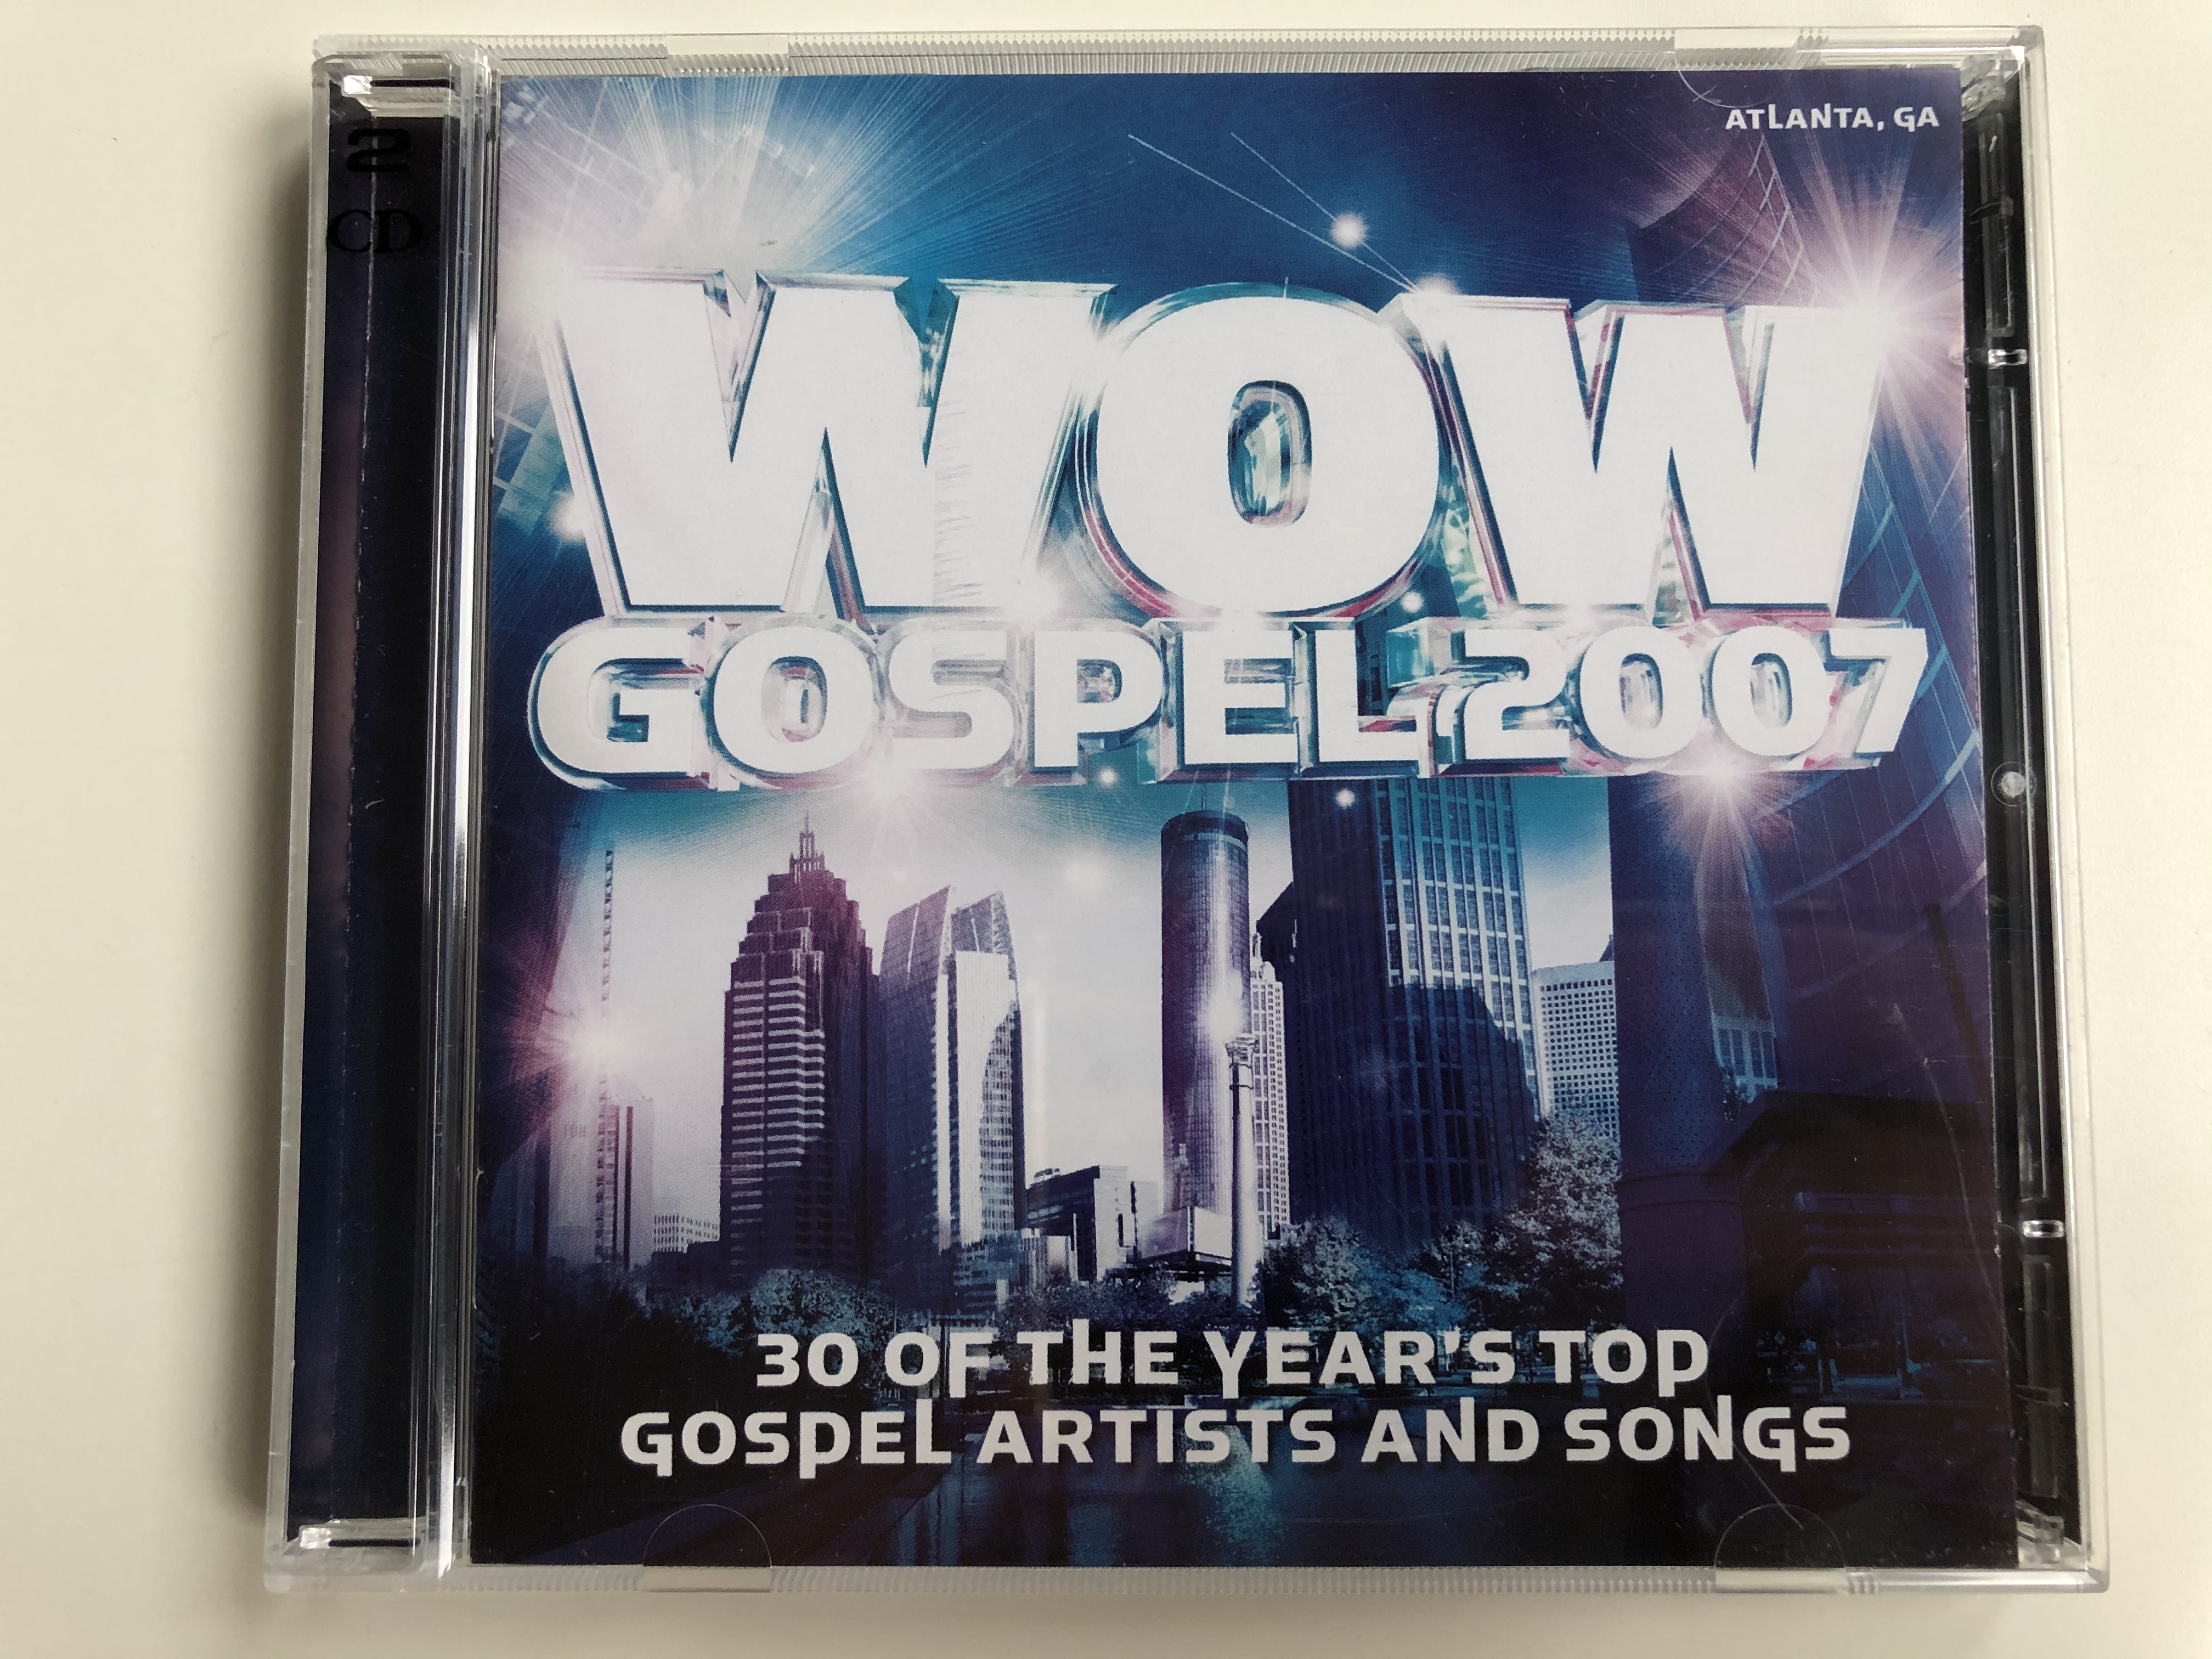 wow-gospel-2007-30-of-the-year-s-top-gospel-artists-and-songs-zomba-label-group-2x-audio-cd-2007-88697-02499-2-1-.jpg